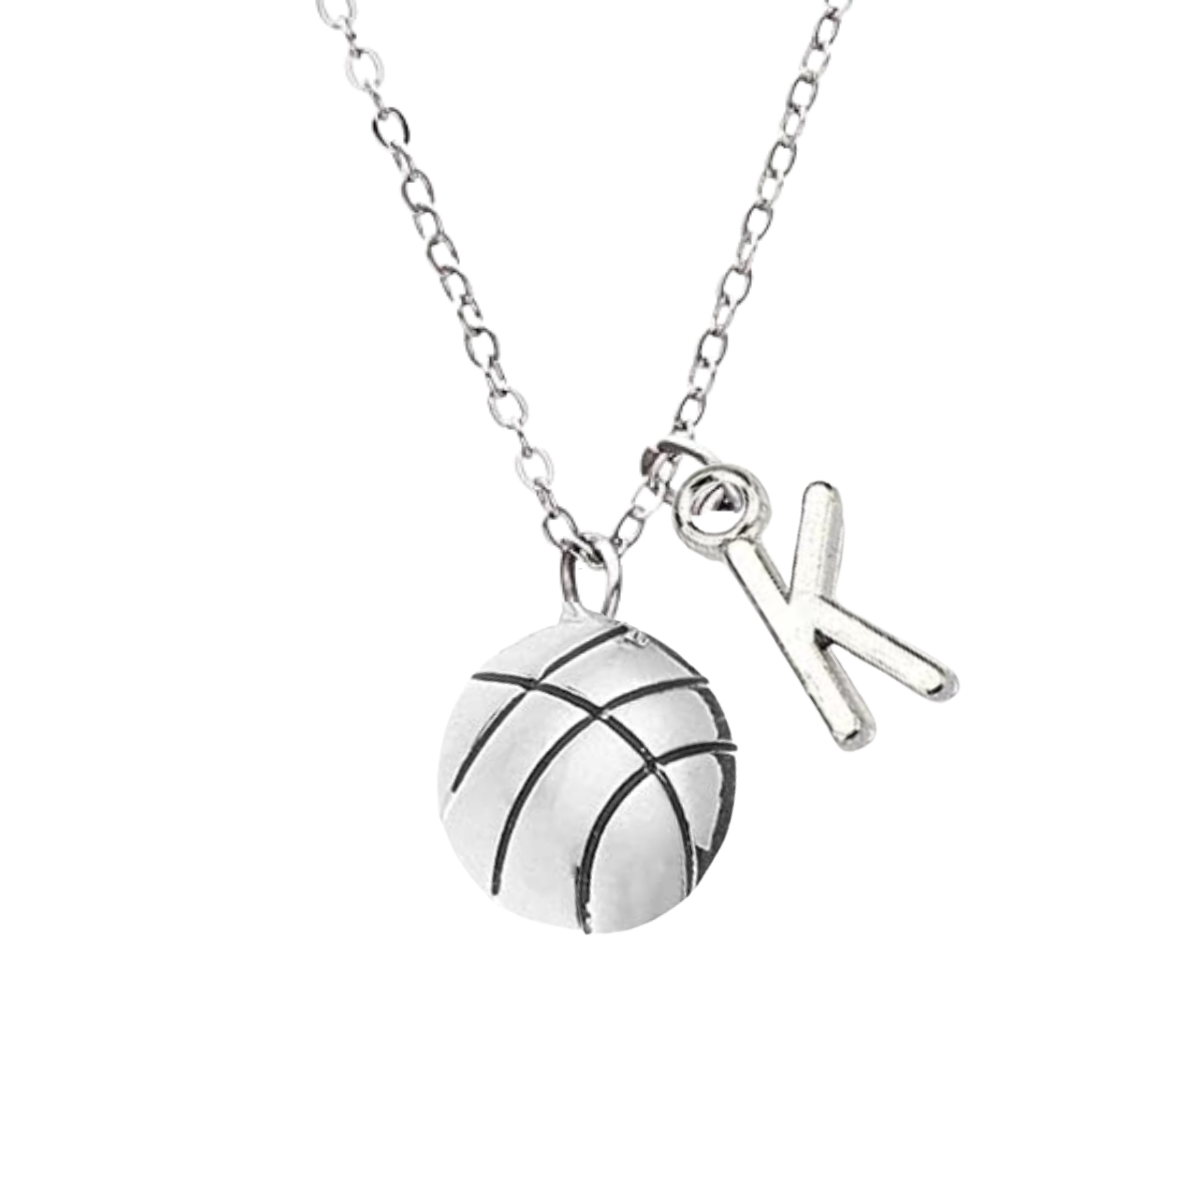 Personalized Basketball Necklace with Letter Charm